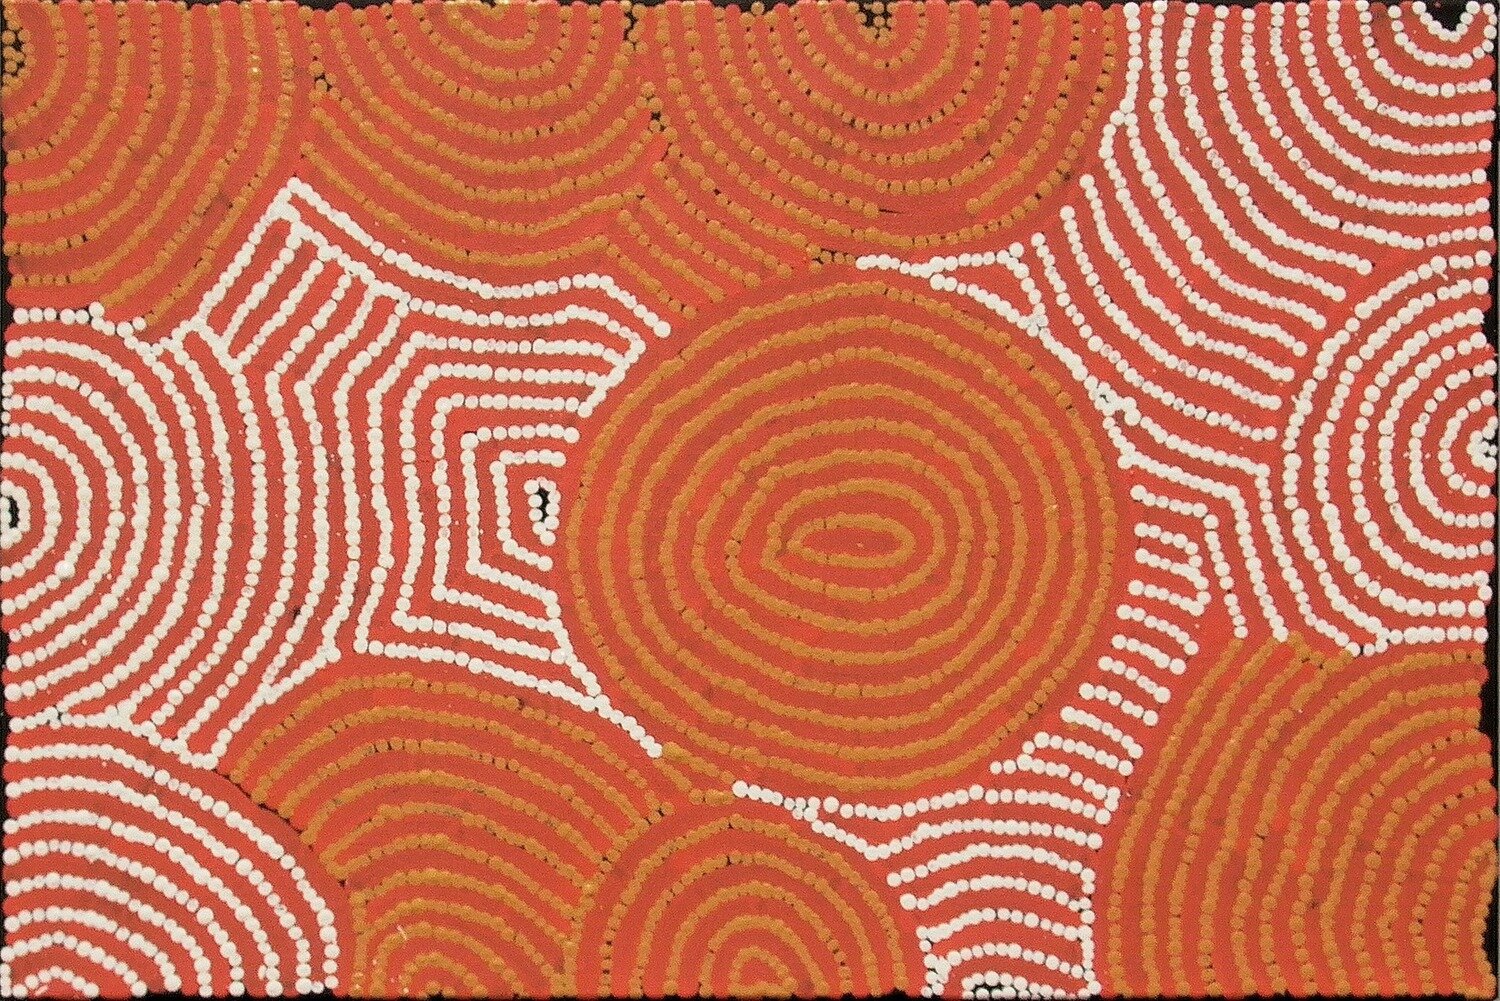 Tingari Cycle (Malliera Ceremonies), 2005 by Barney Campbell Tjakamarra 61x91cm Cat 9367BC